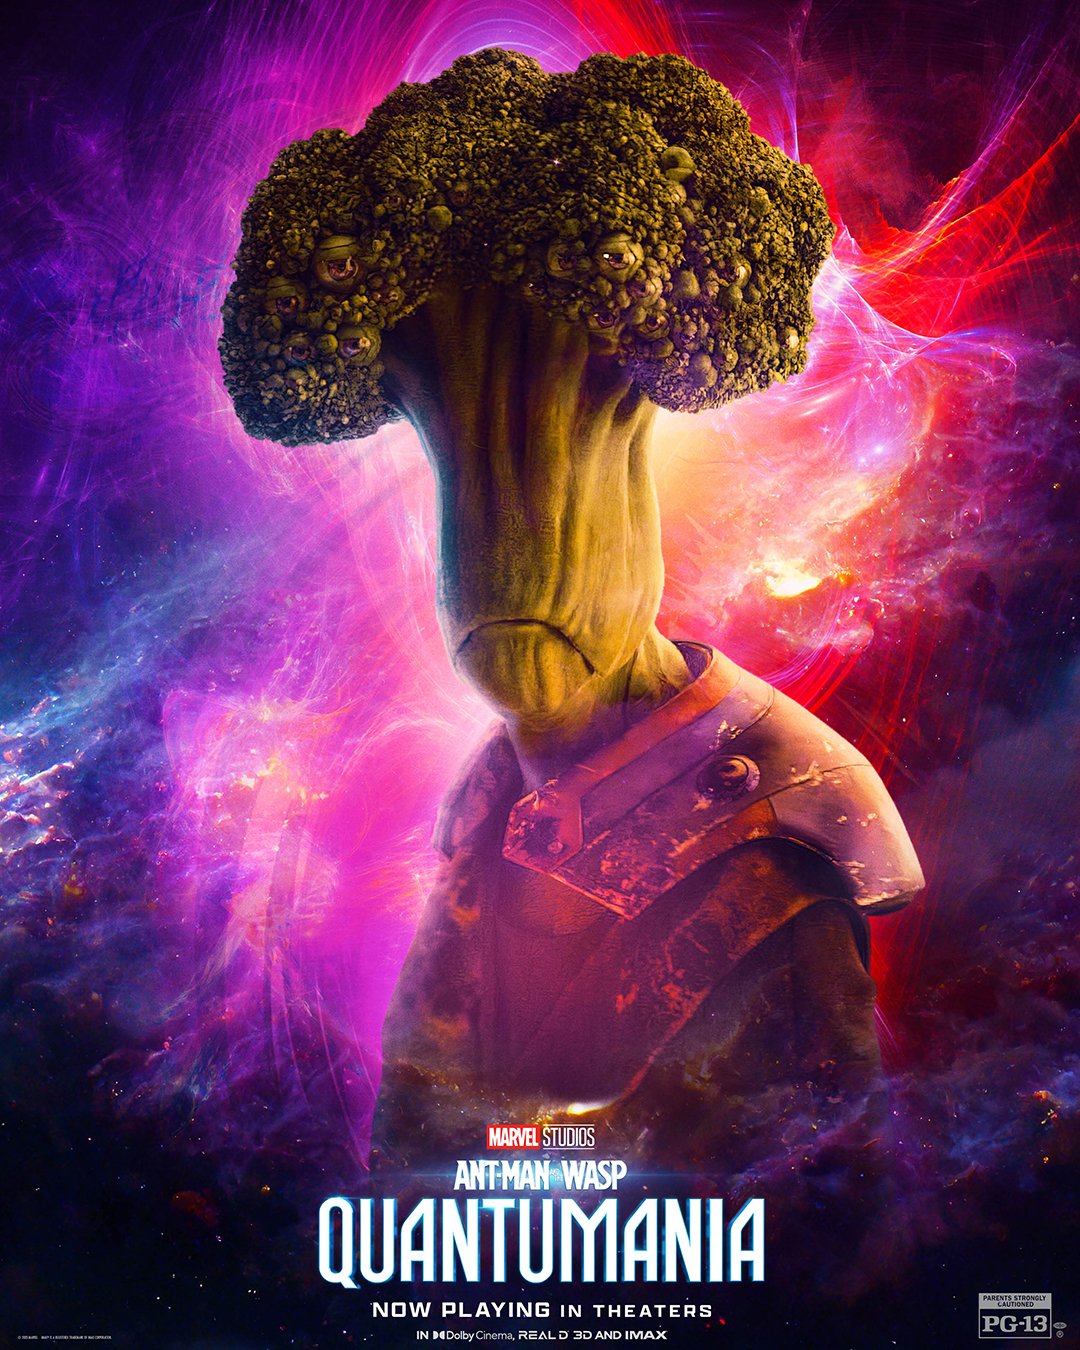 Ant-Man and The Wasp: Quantumania on X: Welcome to the Quantum Realm.  Check out the brand-new character poster for #FurryFace in Marvel Studios'  #AntManAndTheWaspQuantumania. Now playing in 3D, only in theaters. Get